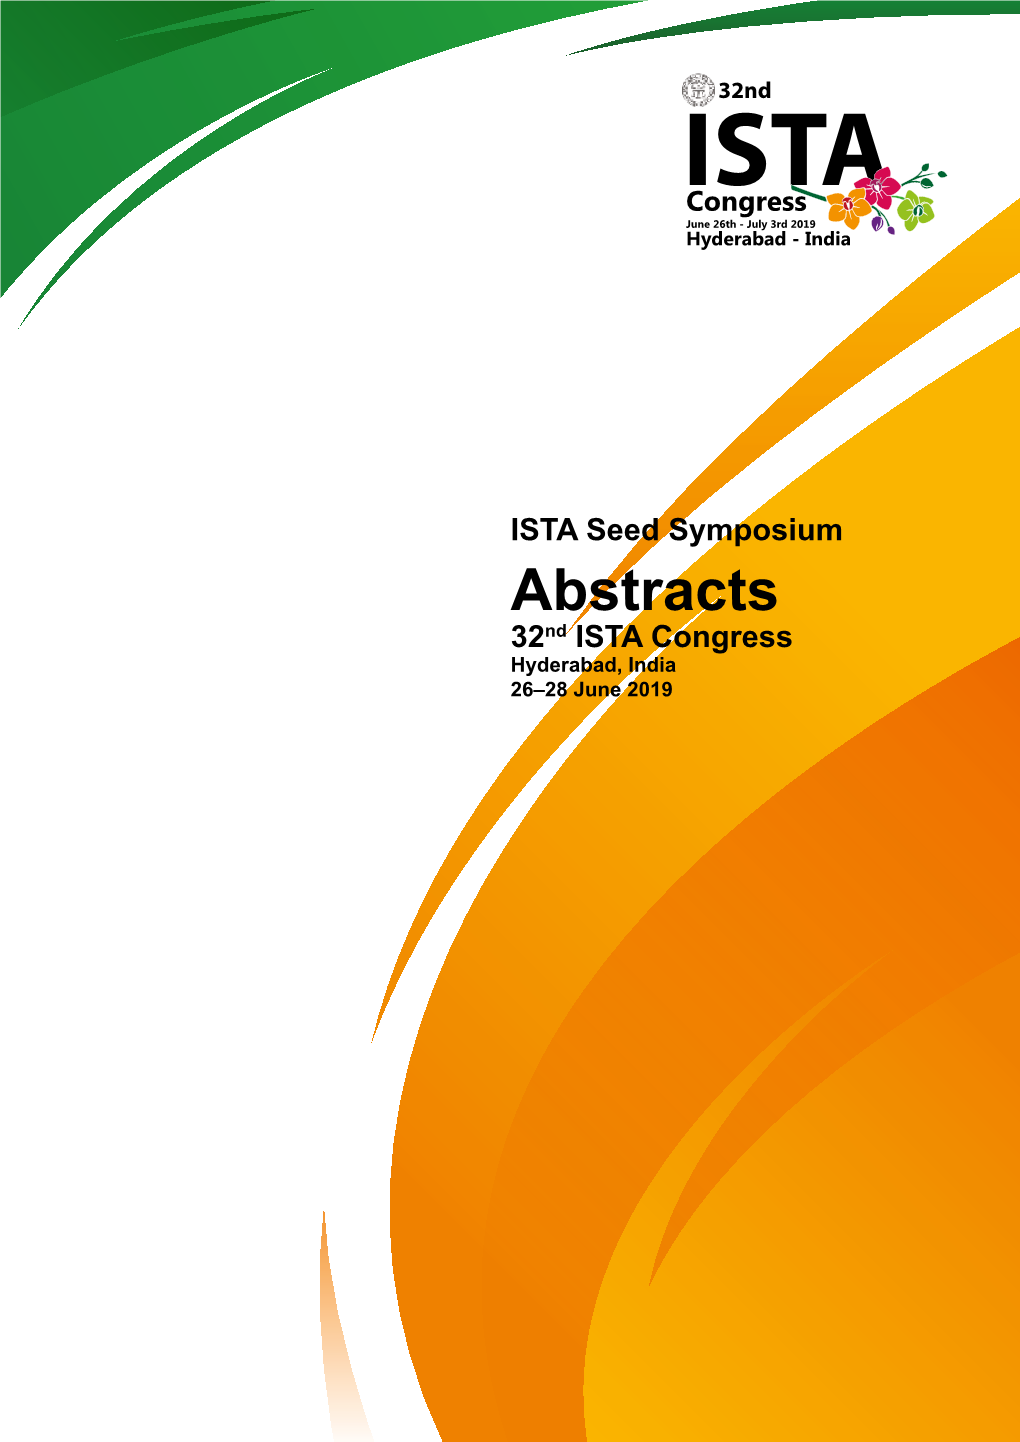 Abstracts Book